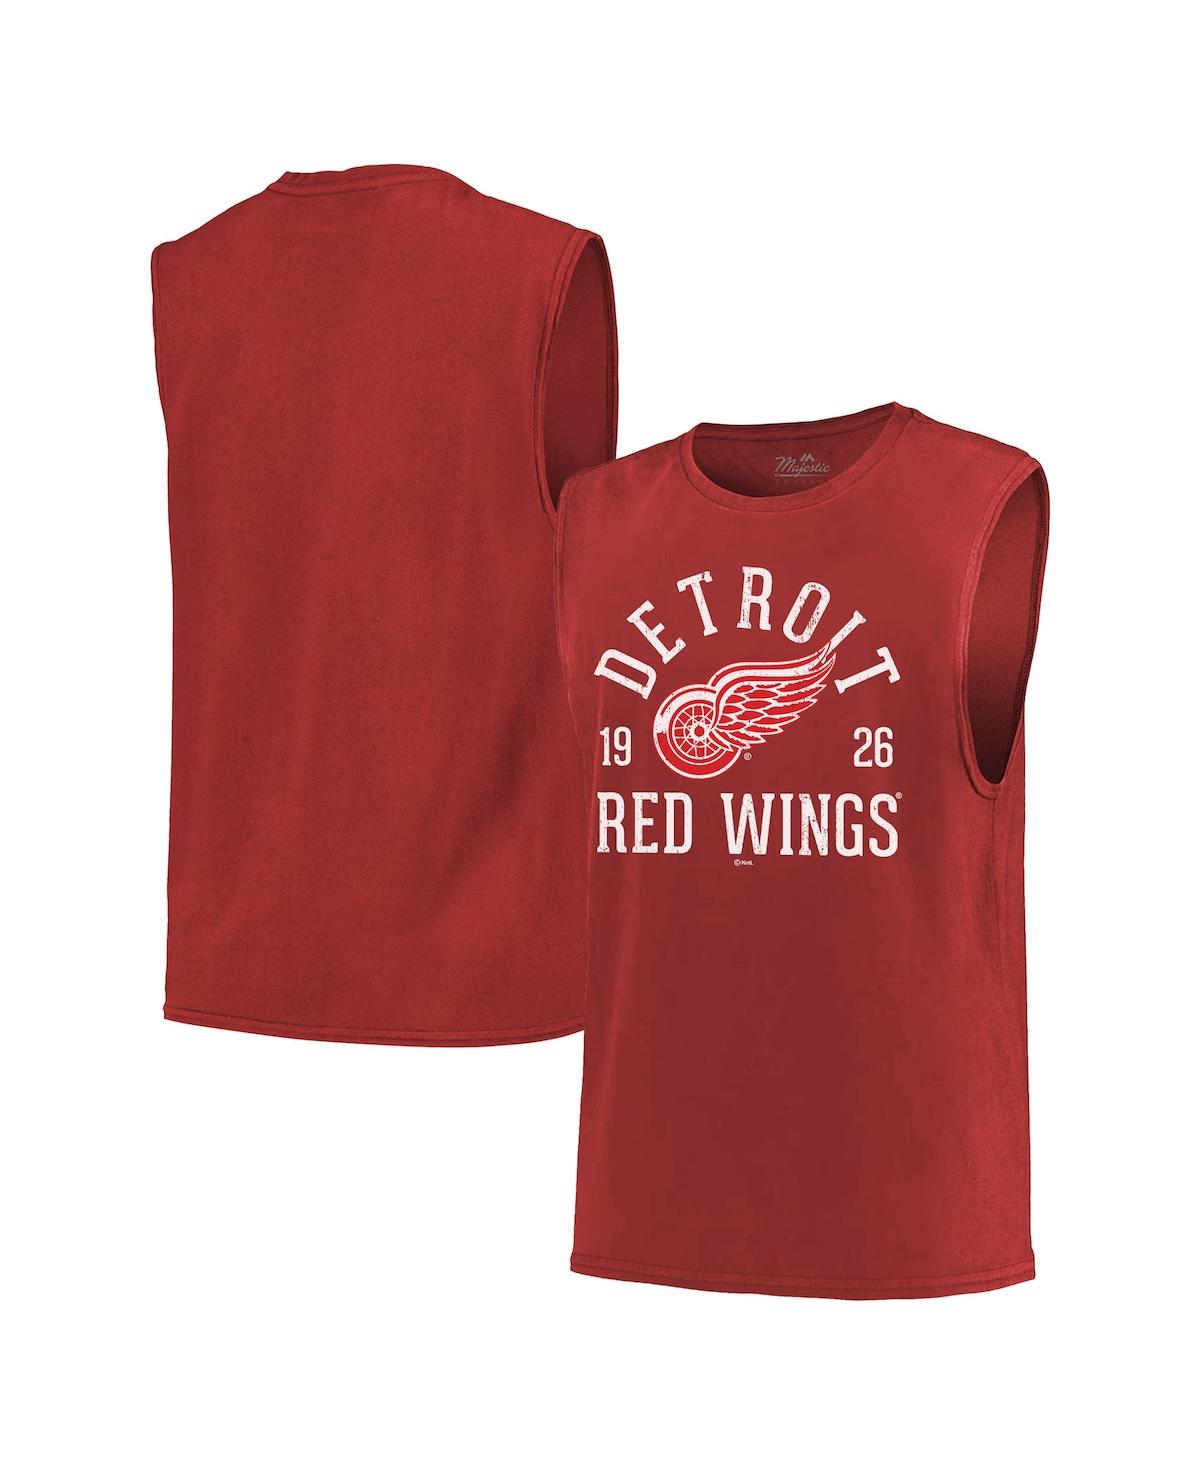 MAJESTIC MEN'S MAJESTIC THREADS RED DETROIT RED WINGS SOFTHAND MUSCLE TANK TOP